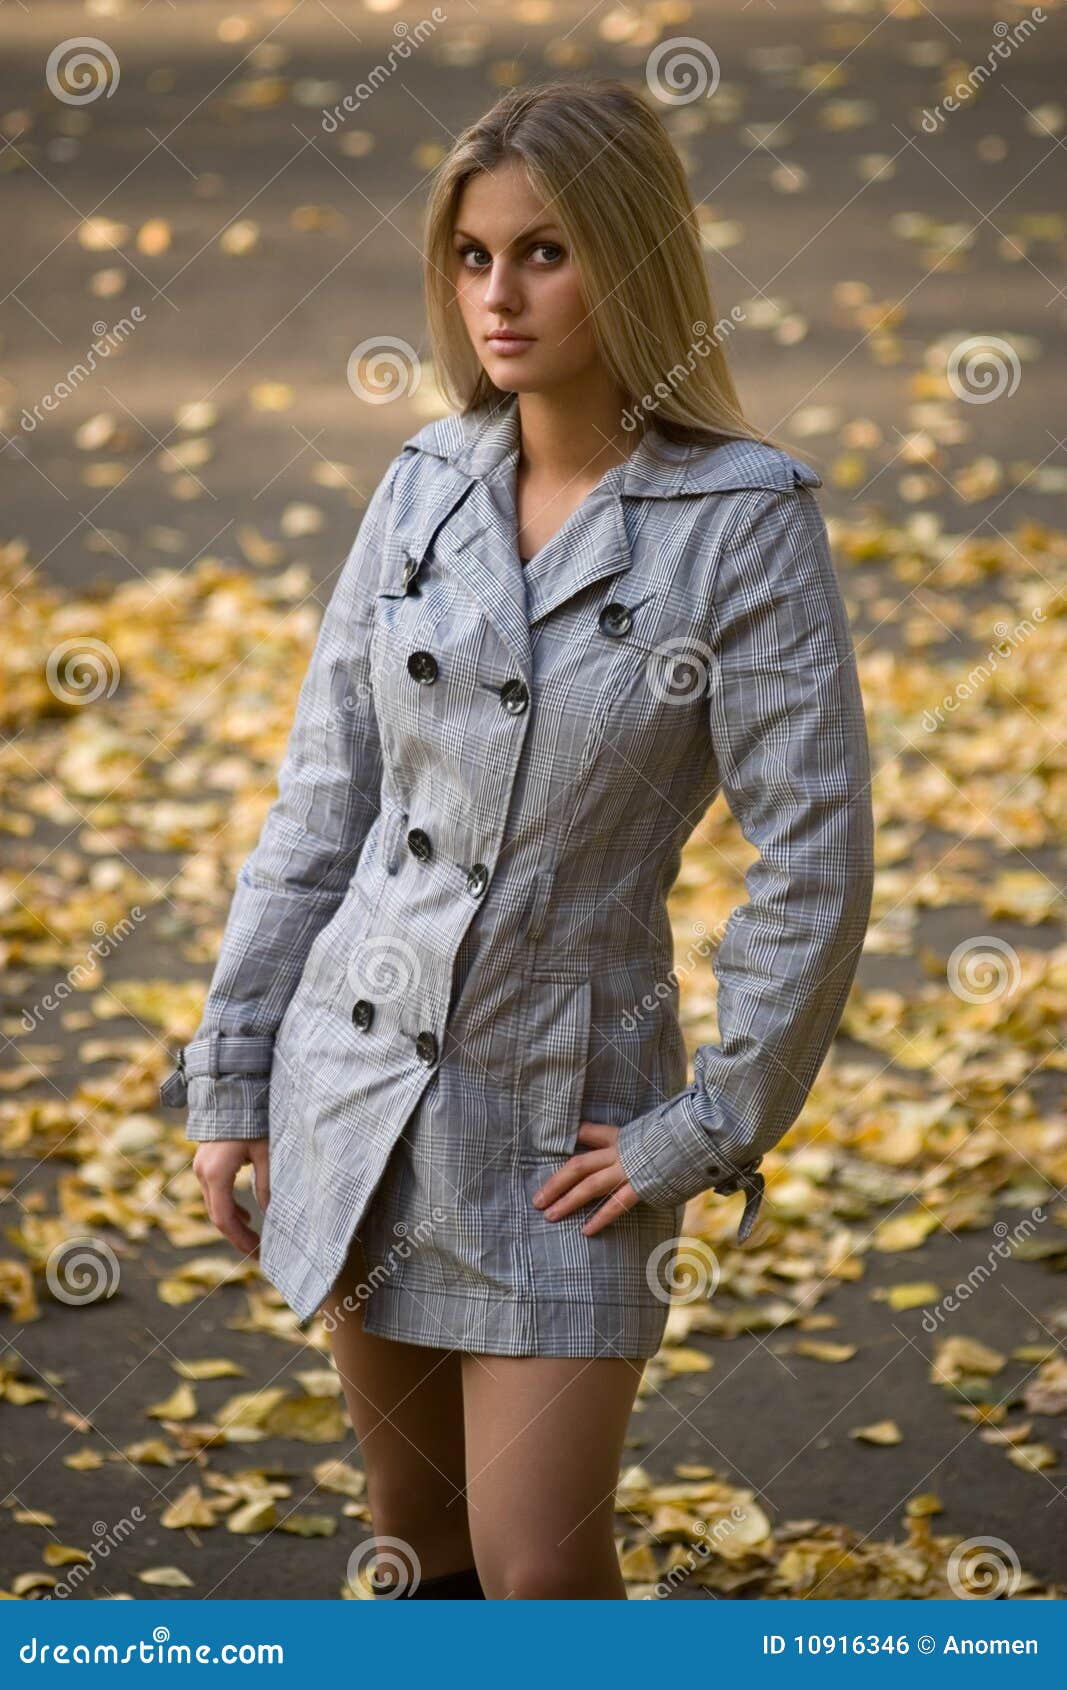 Woman in the park stock photo. Image of adorable, model - 10916346